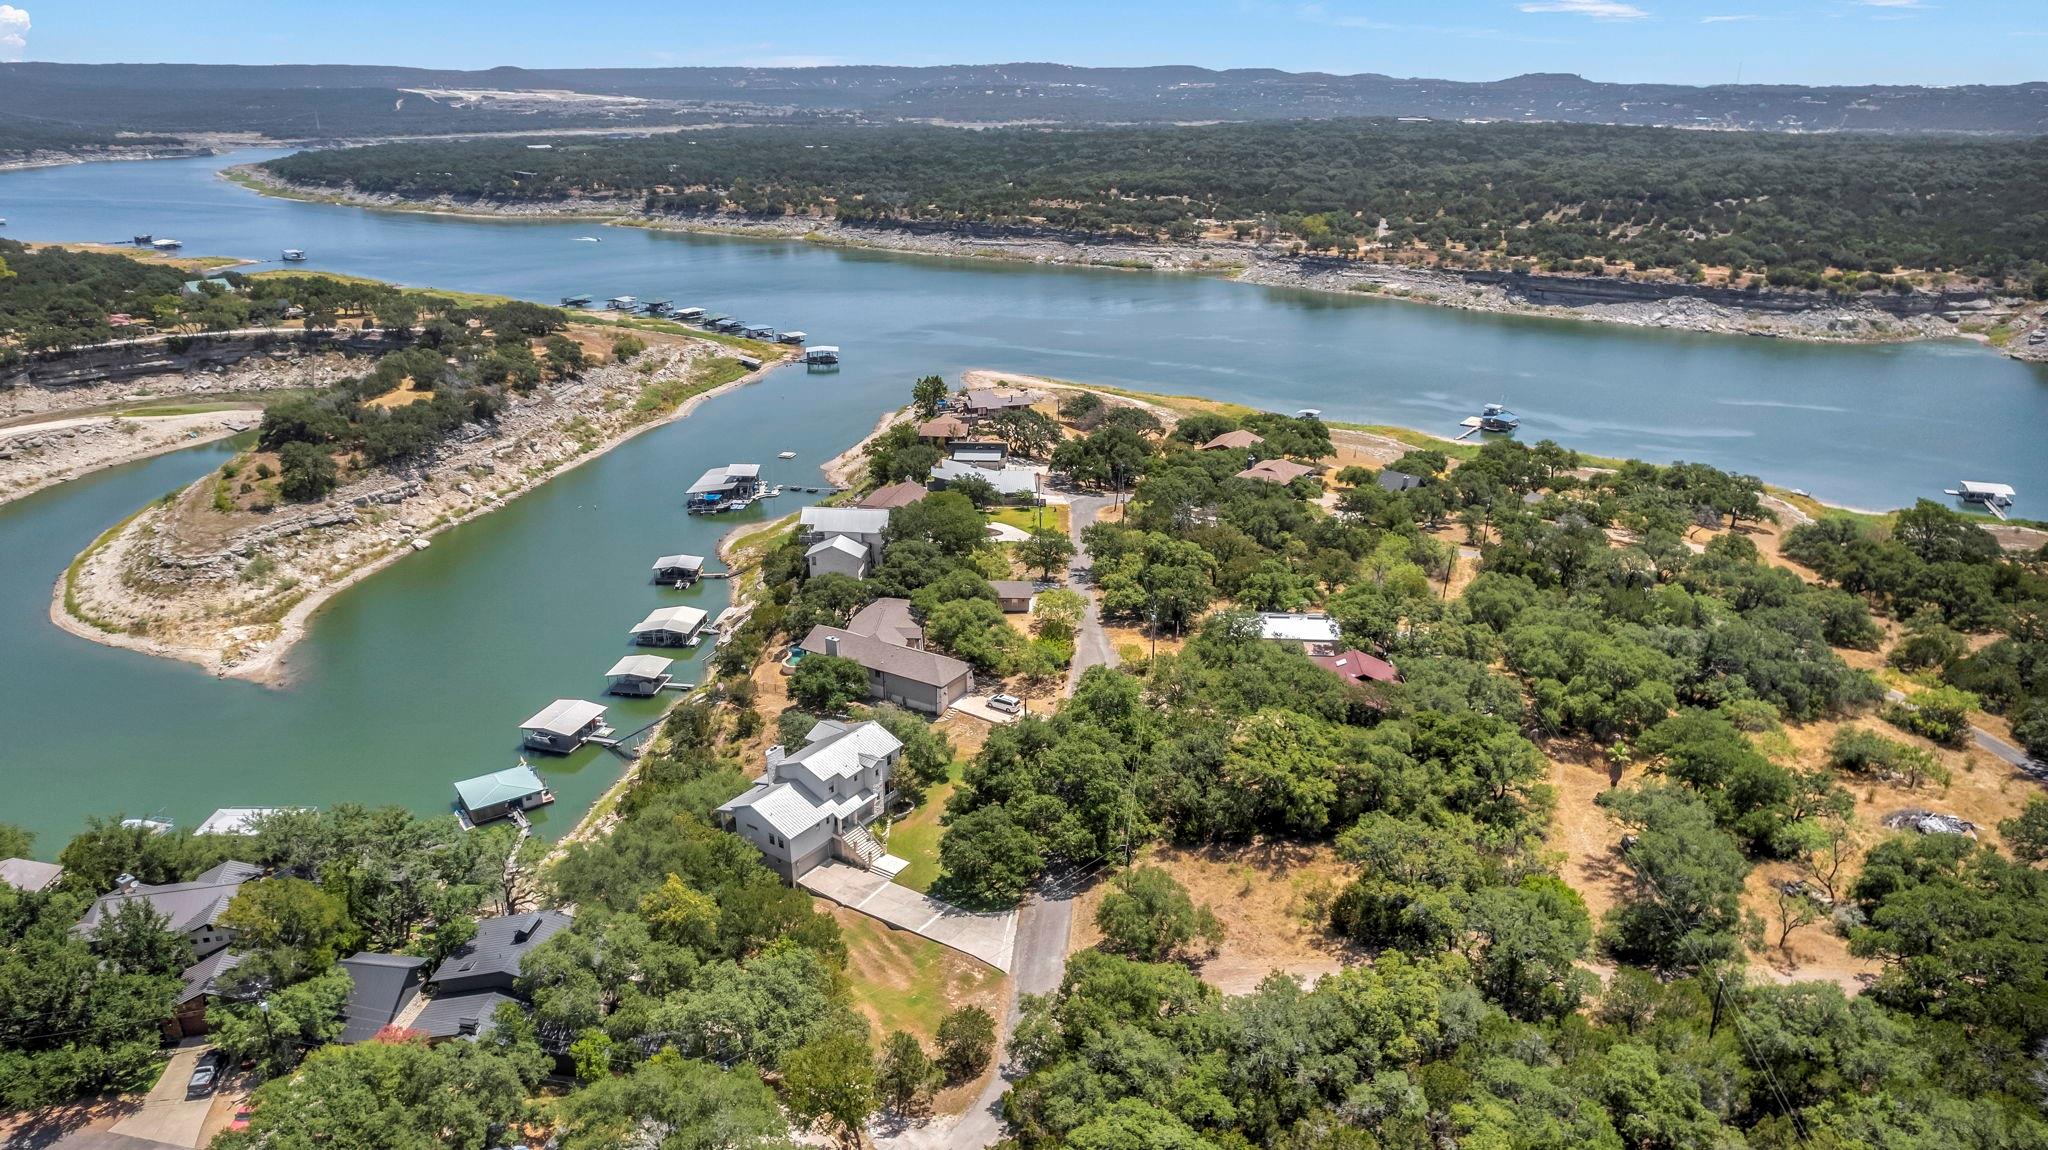 View Marble Falls, TX 78654 property